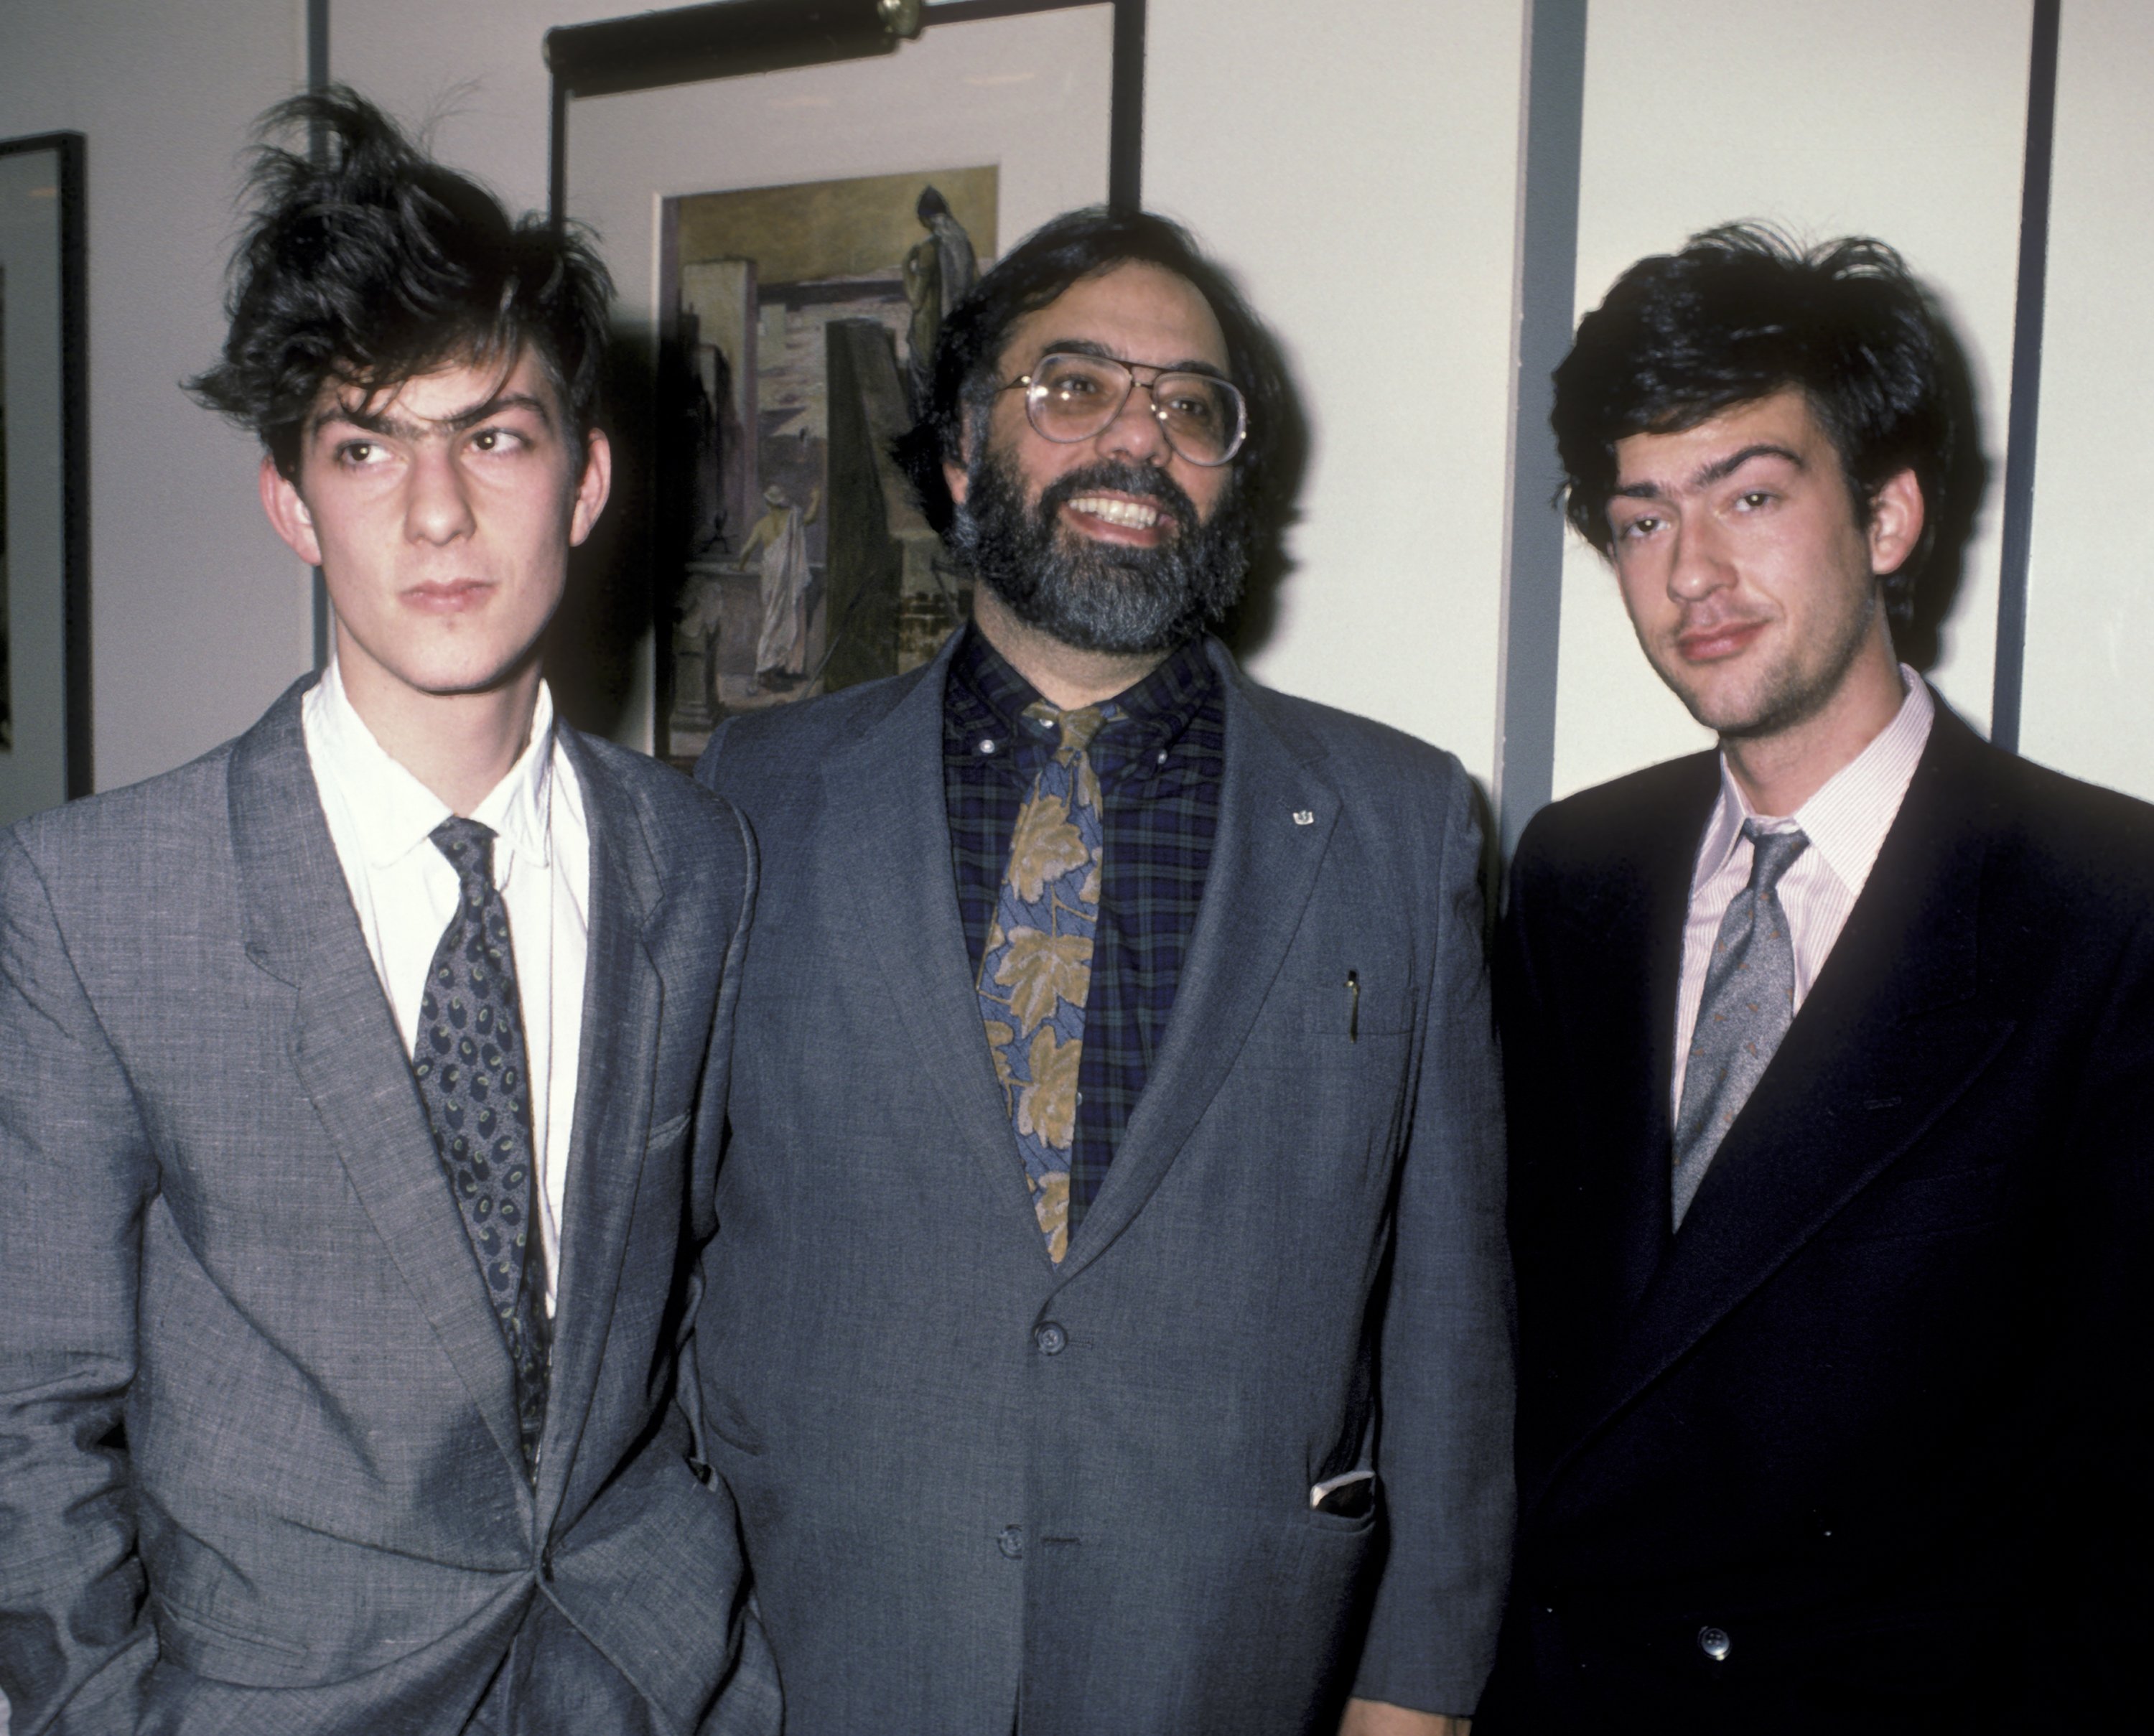 Francis Ford Coppola, Roman Coppola and Gian-Carlo Coppola attend the screening party for "Runaway Train" on January 7, 1986 at Les Tuileries in New York City. | Source: Getty Images